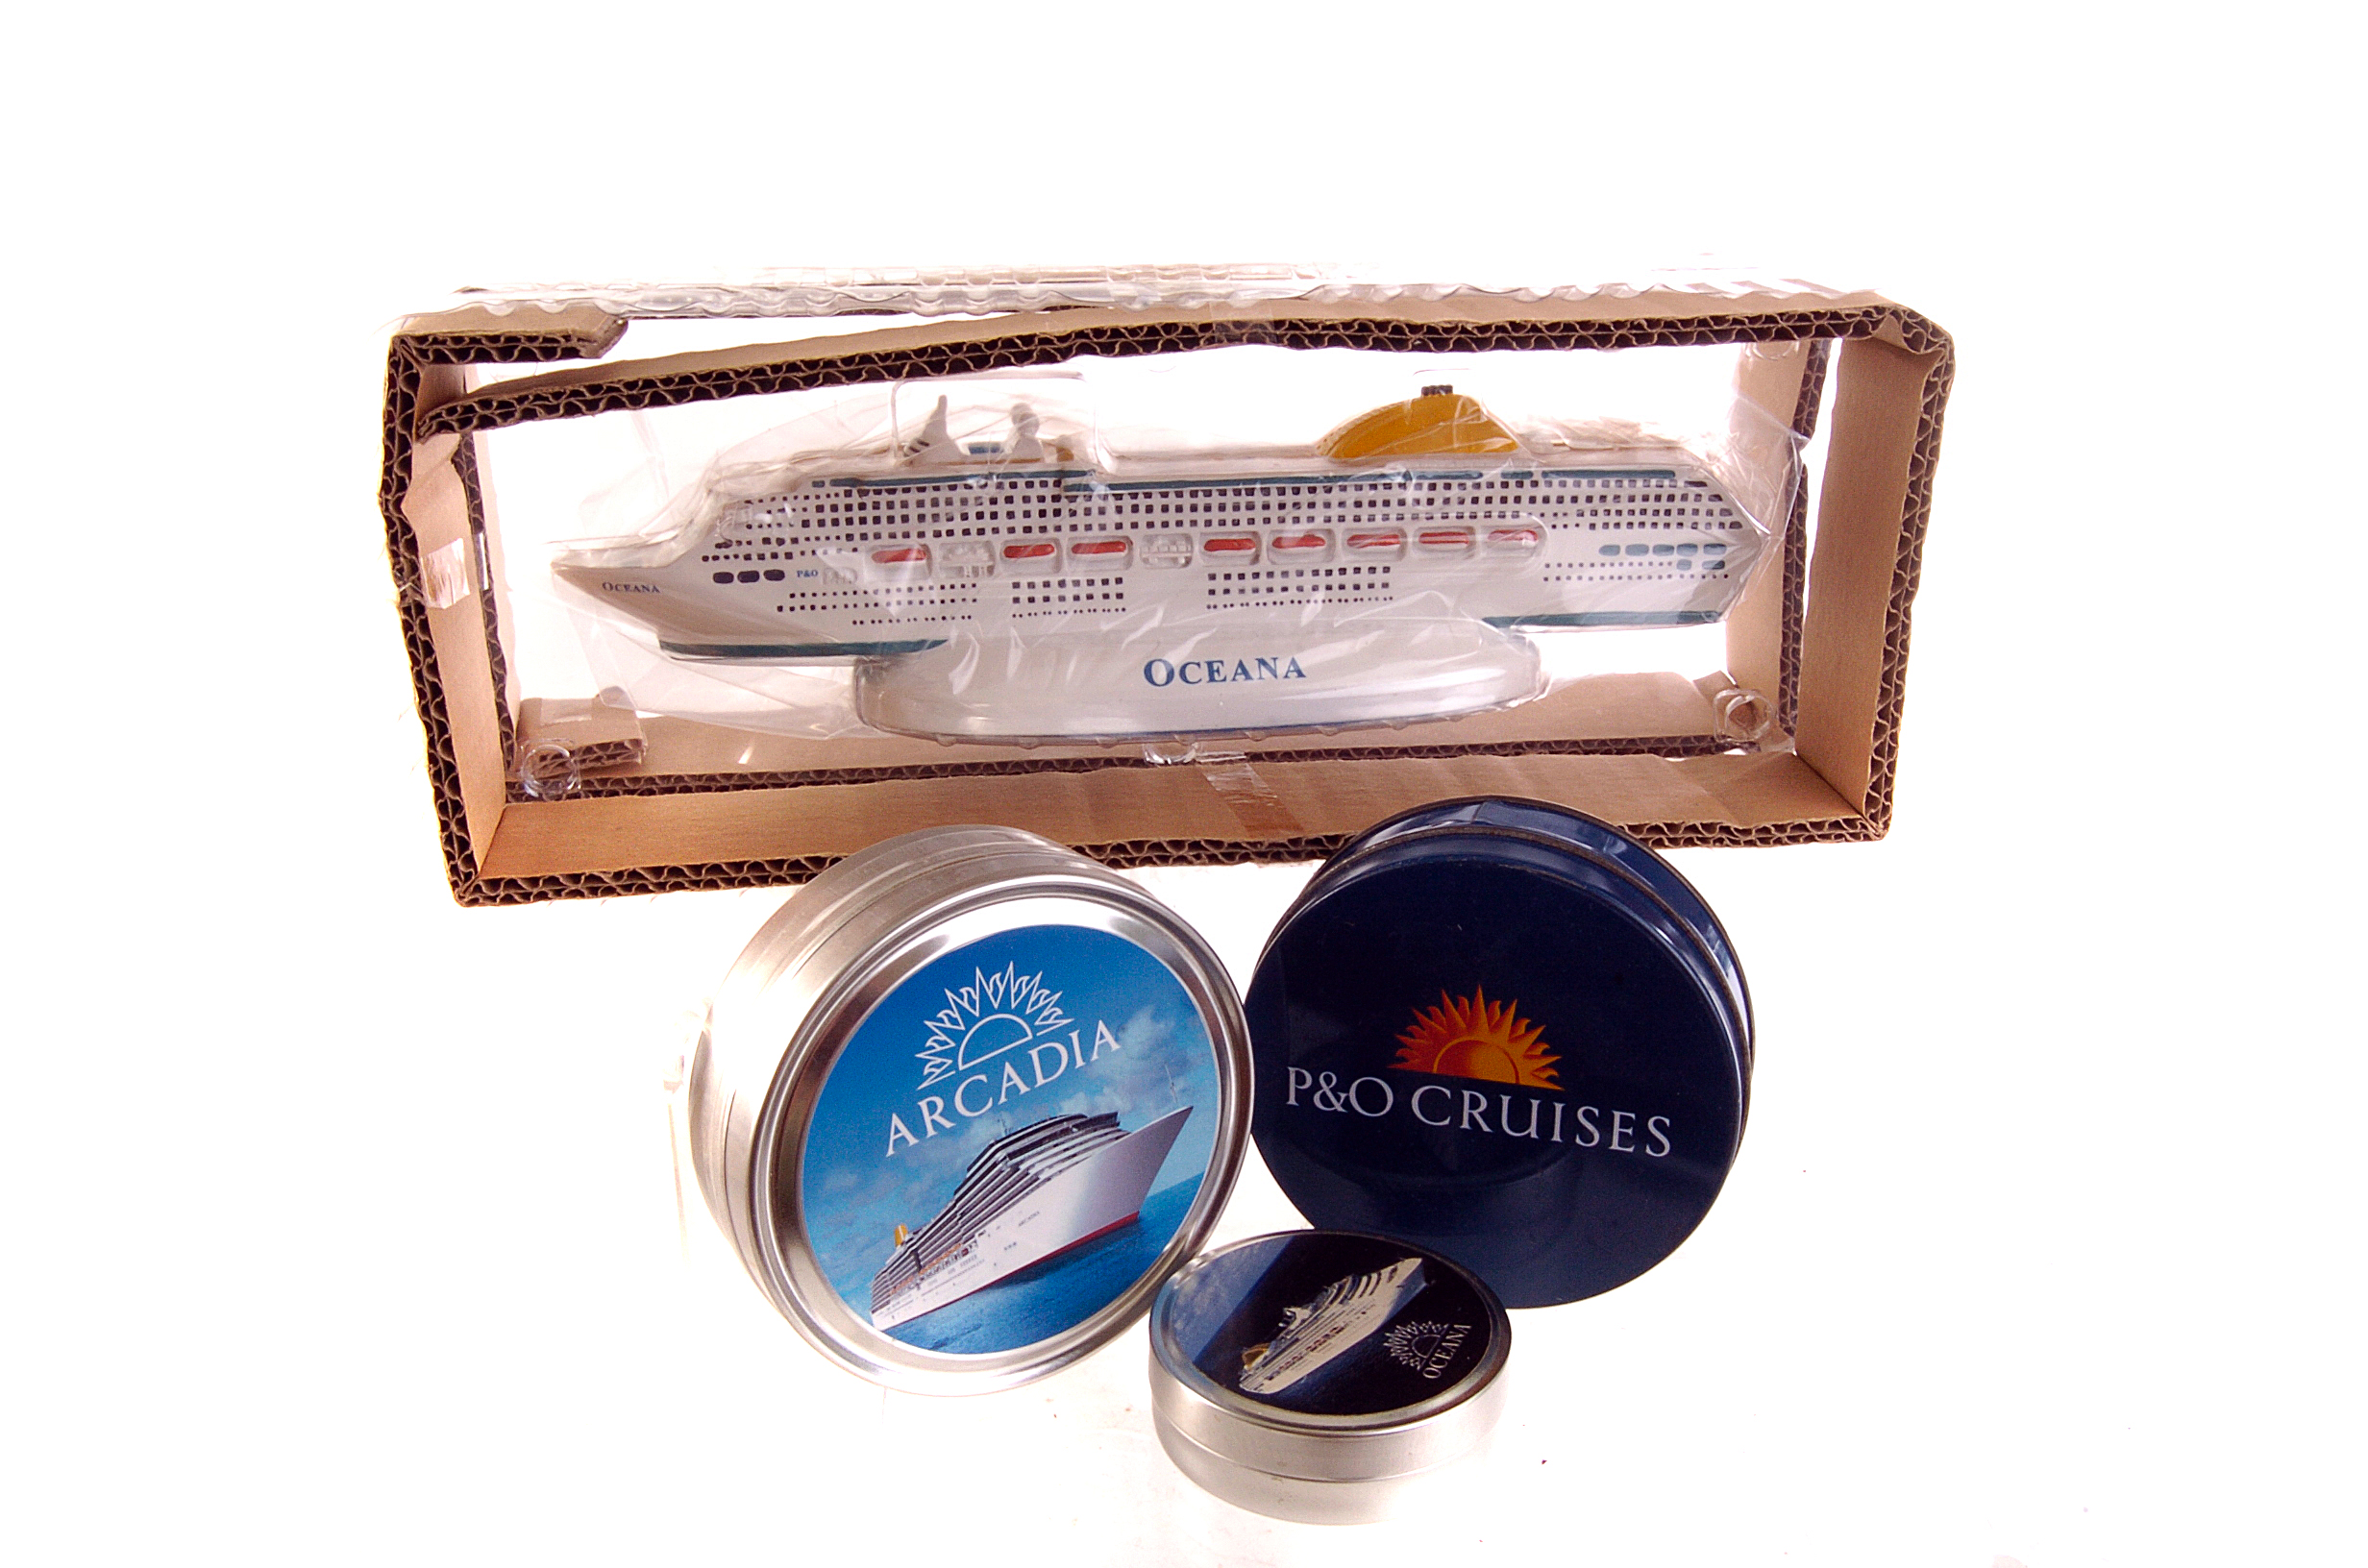 An Oceana ship figure, together with a selection of Oceana and Arcadia mint tins, some with